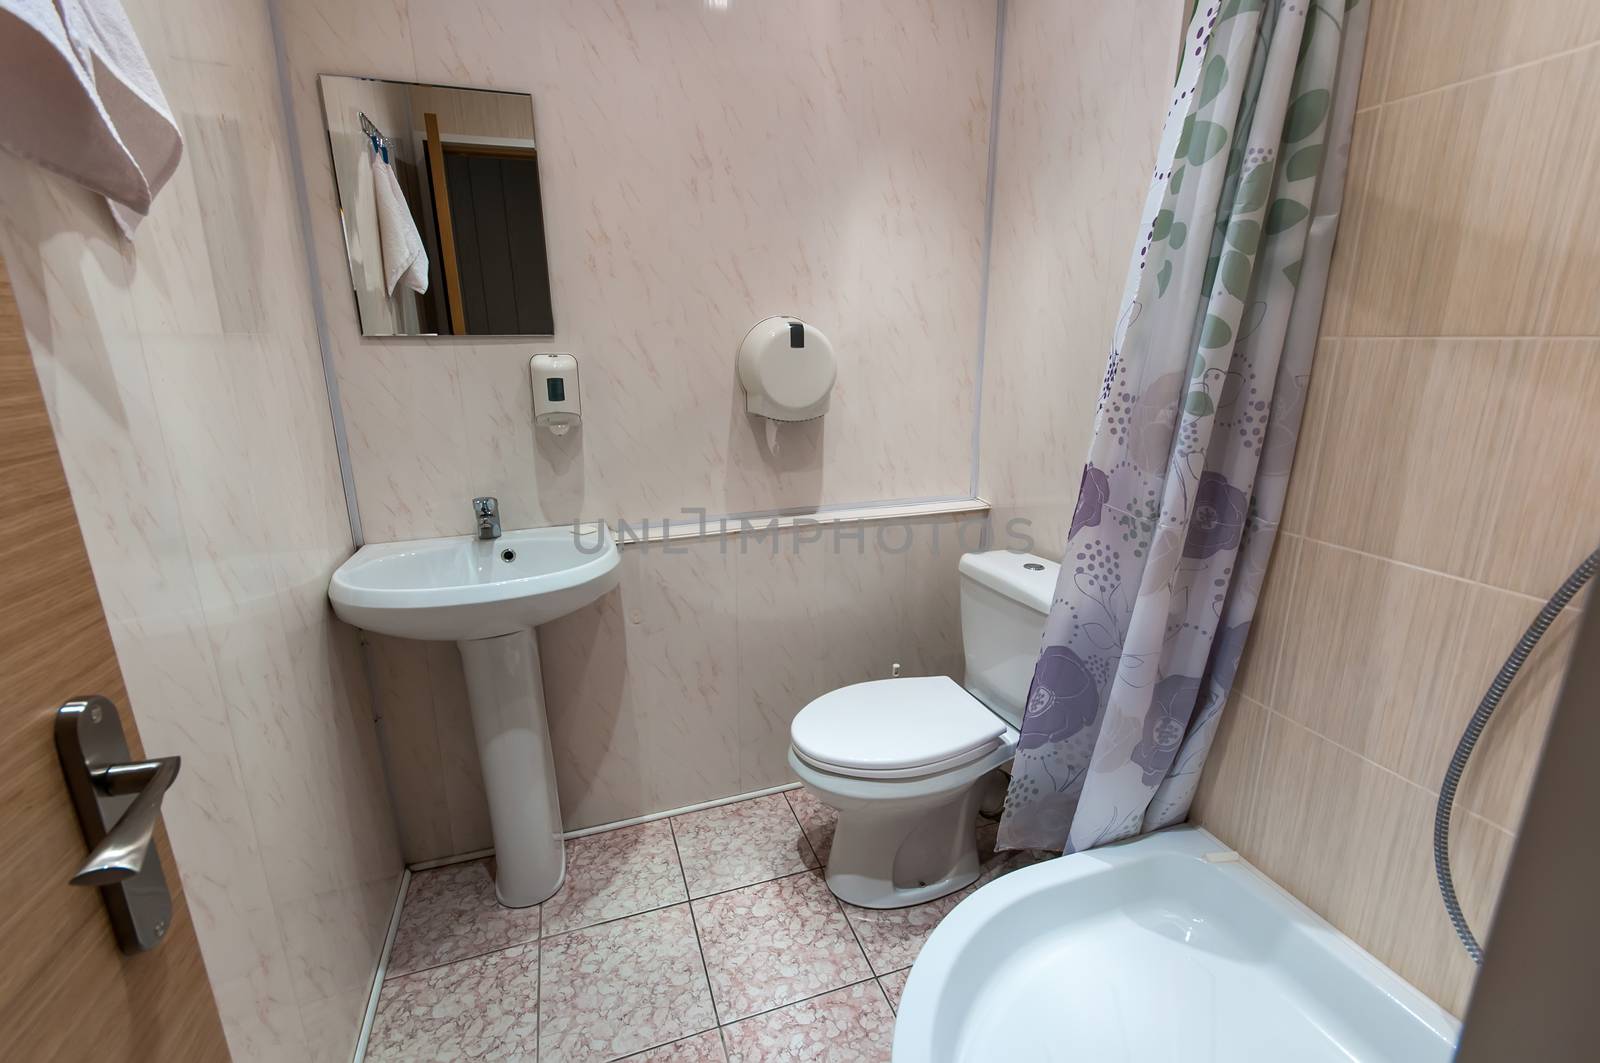 combined bathroom with sink toilet and shower tray